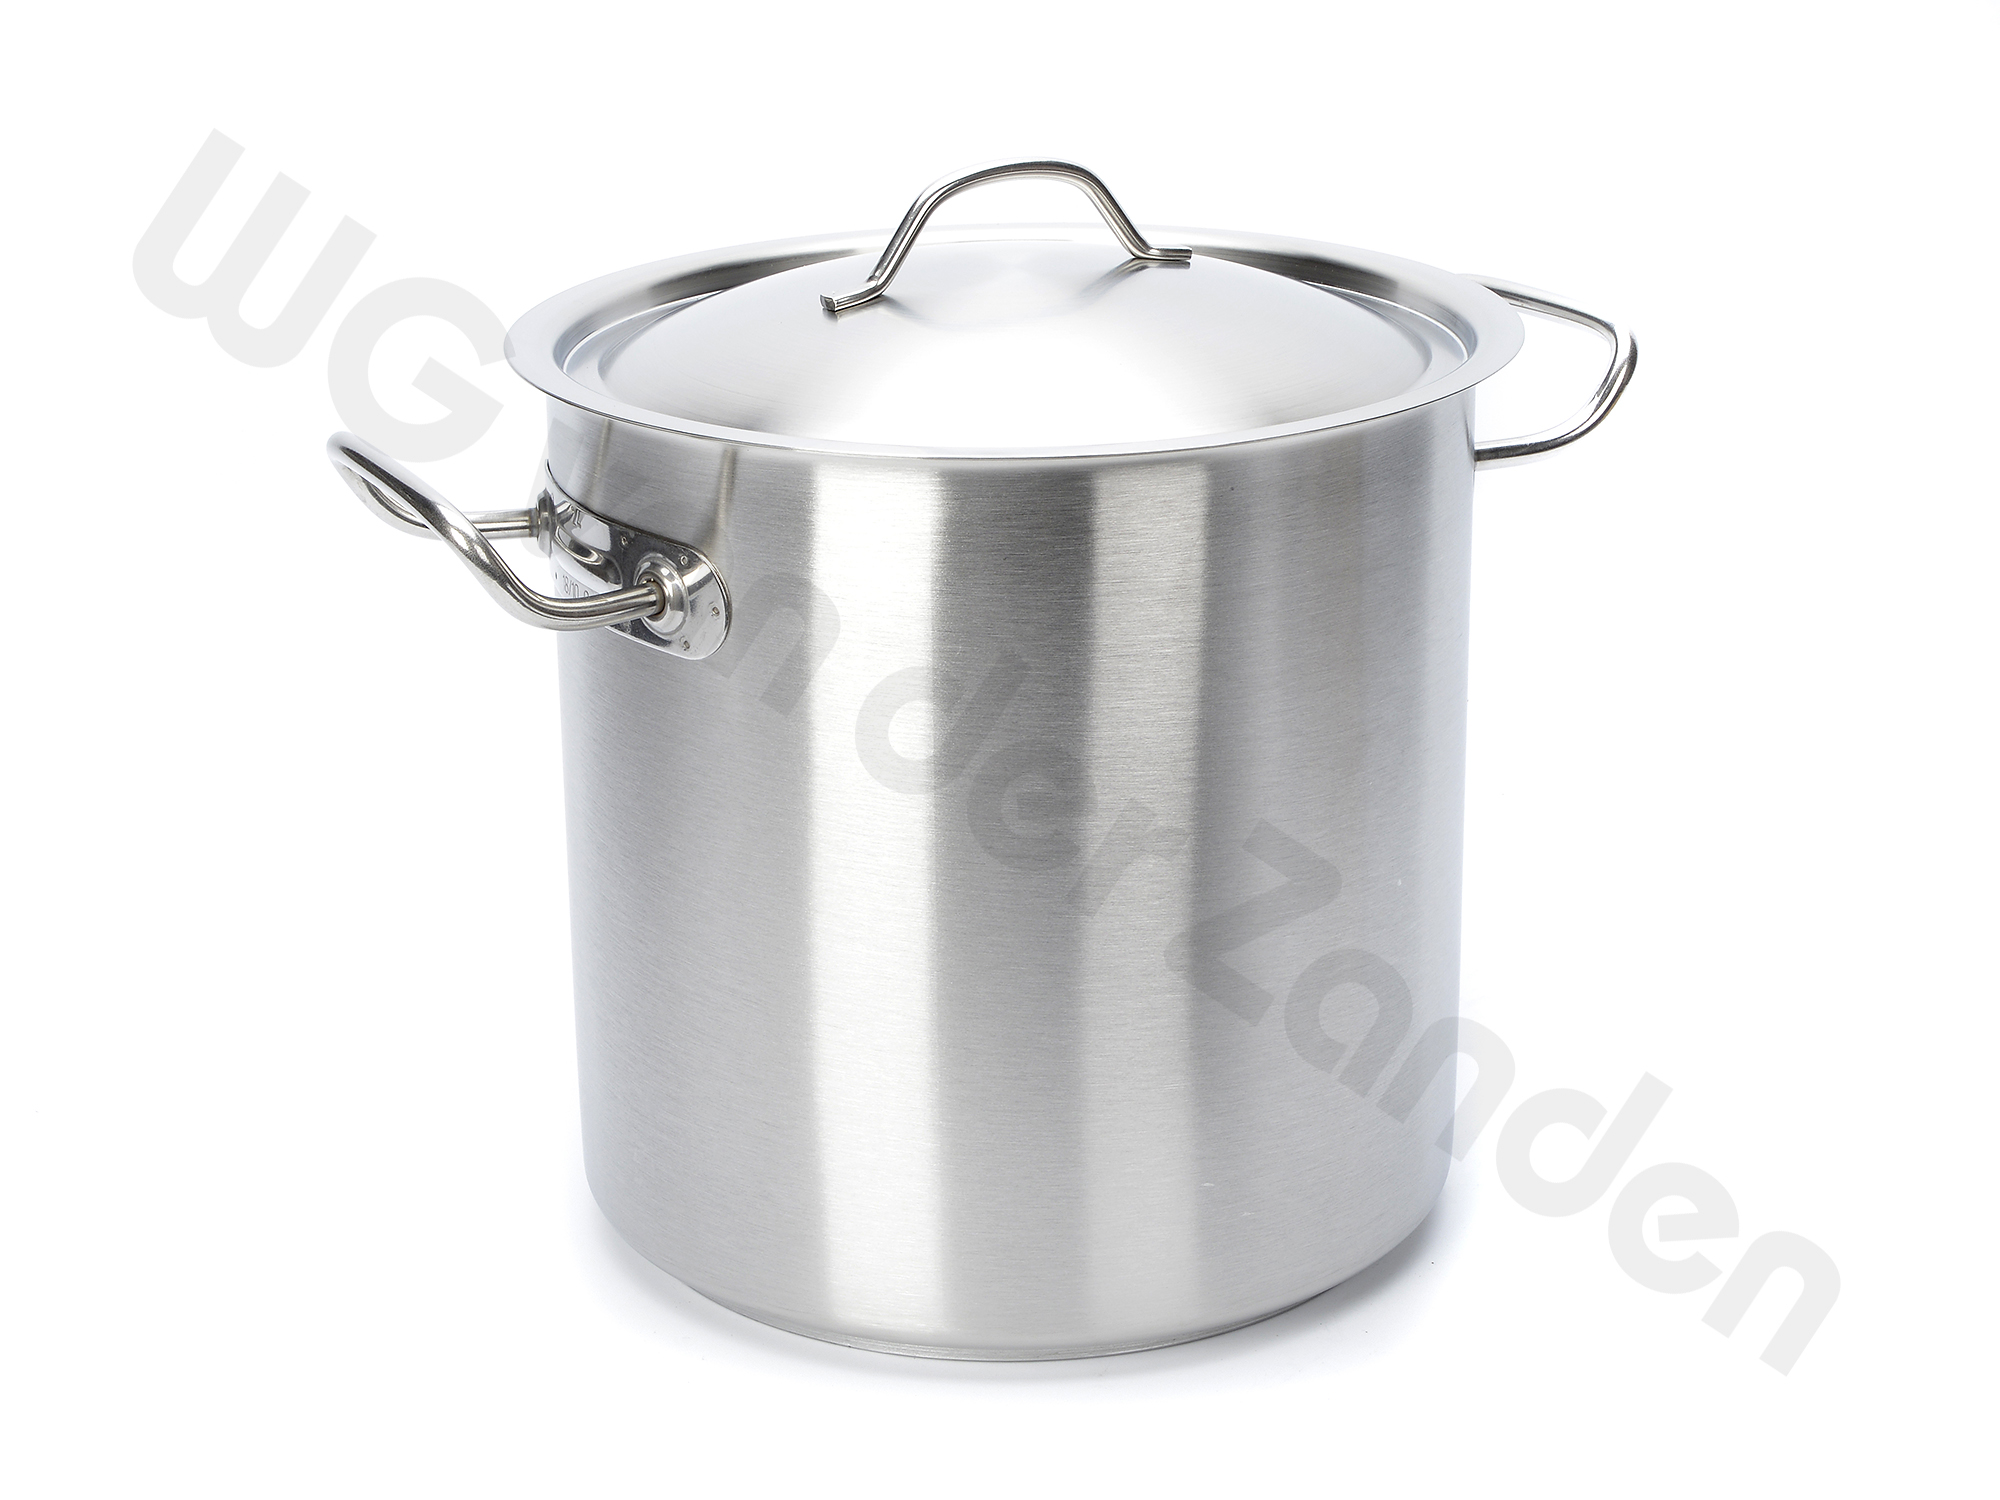 521616 STOCKPOT S/S 16Ø X 16CM 3.1 LTR WITH COVER